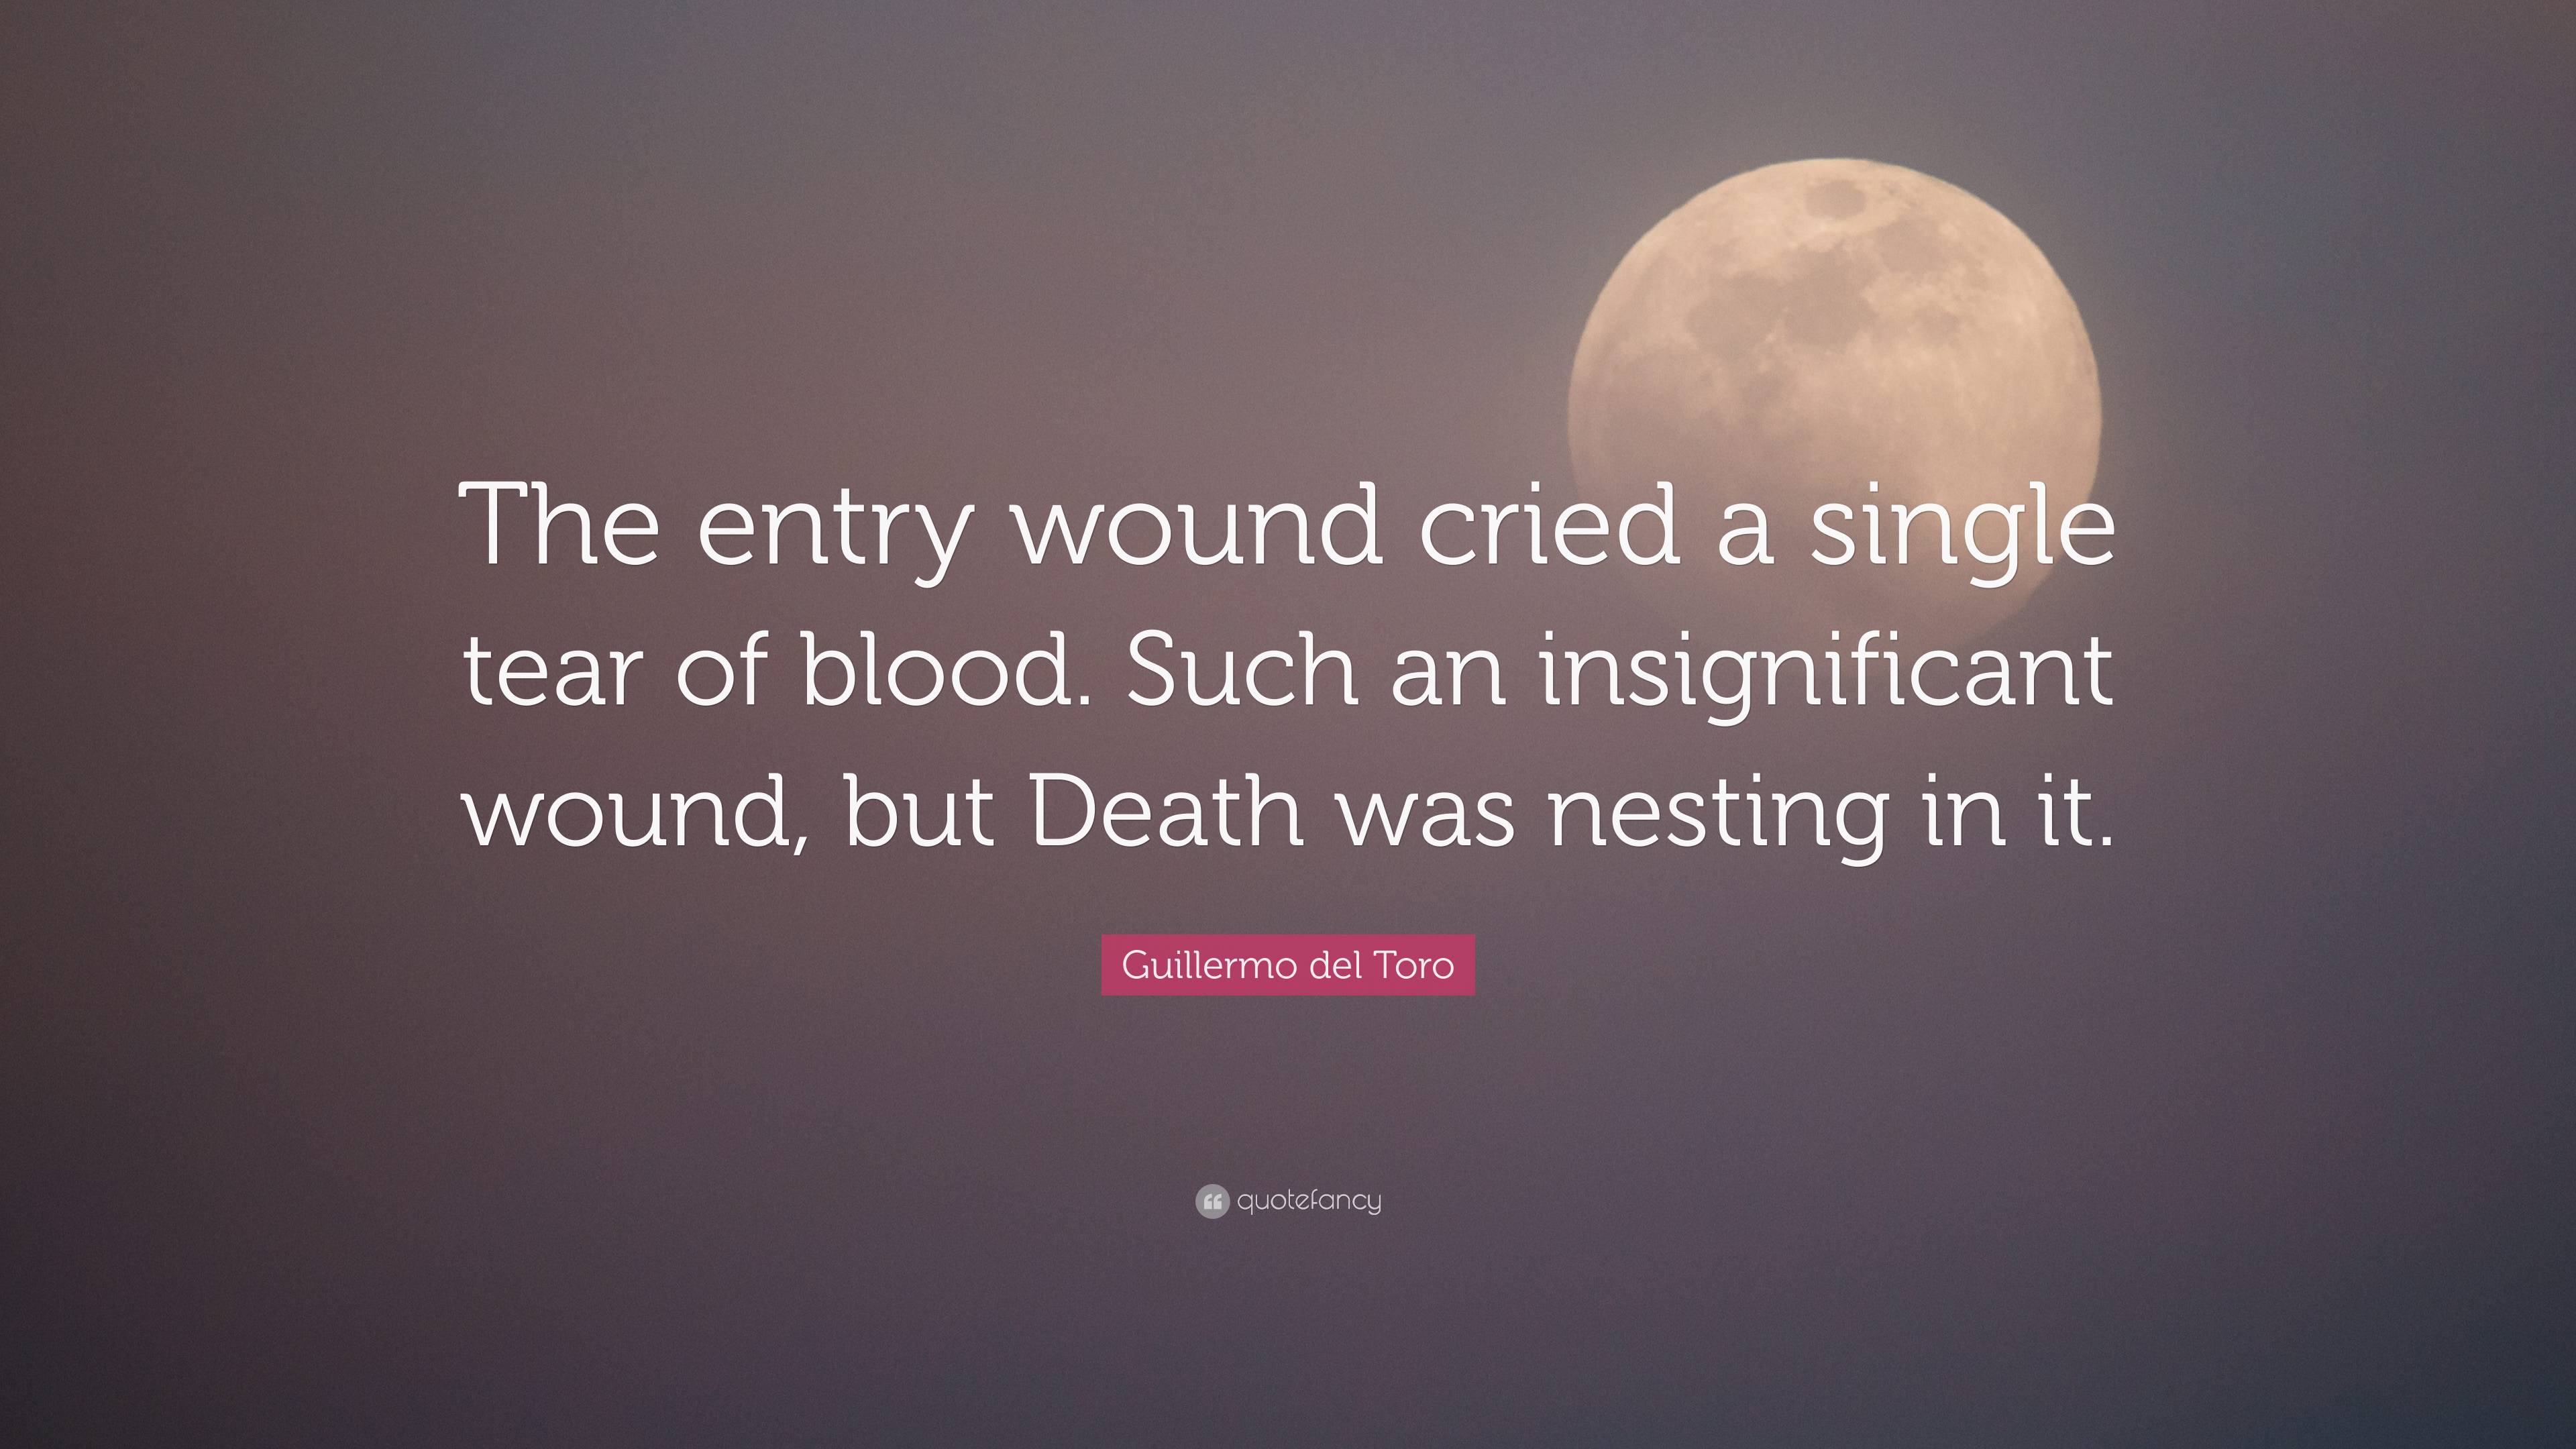 Guillermo del Toro Quote: “The entry wound cried a single tear of blood ...